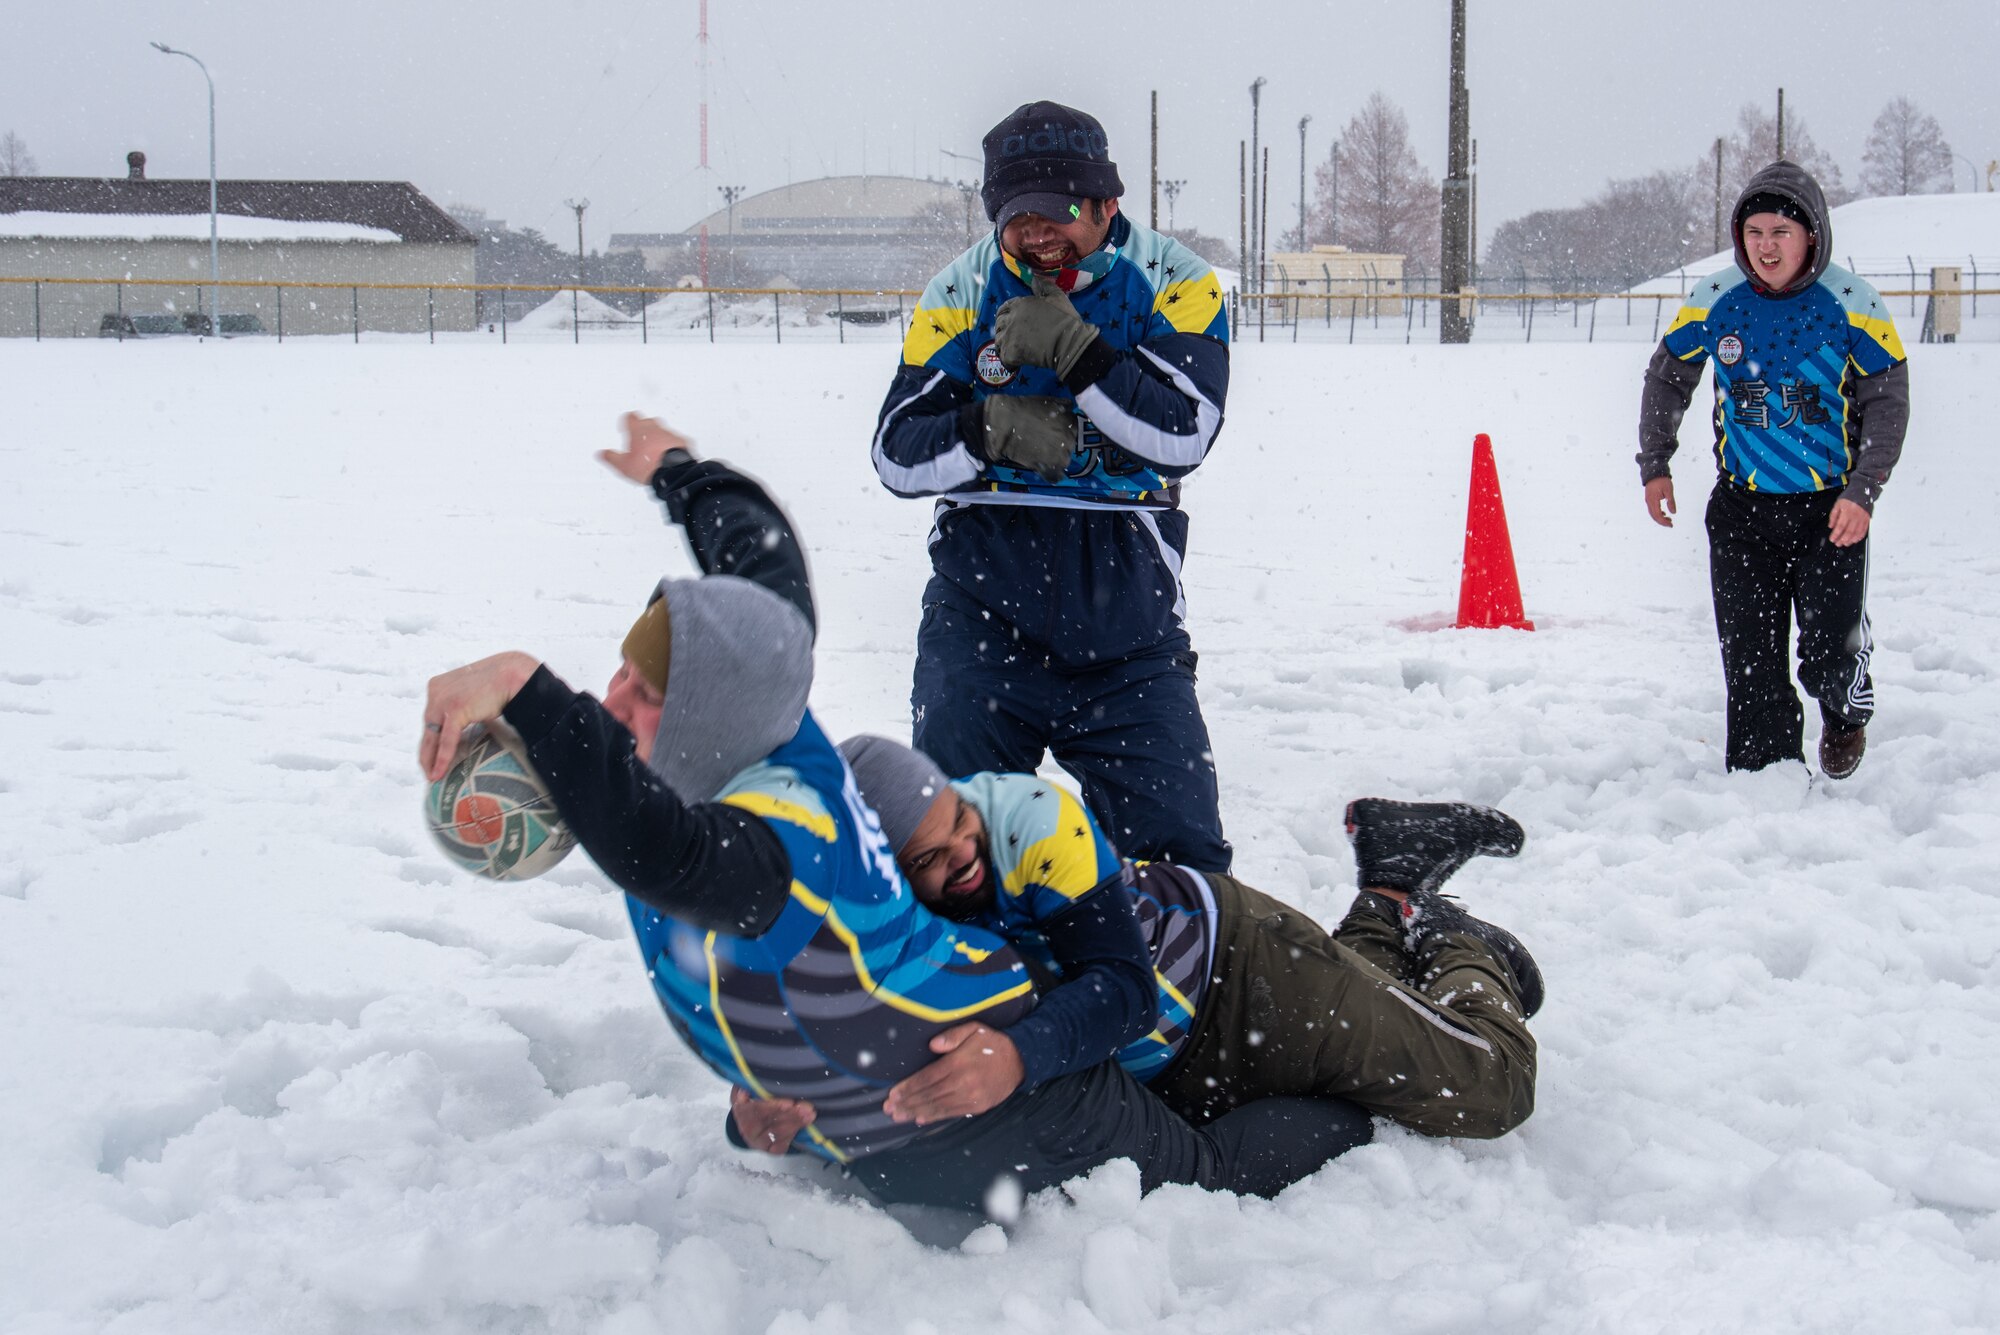 Member of Misawa rugby team gets tackled